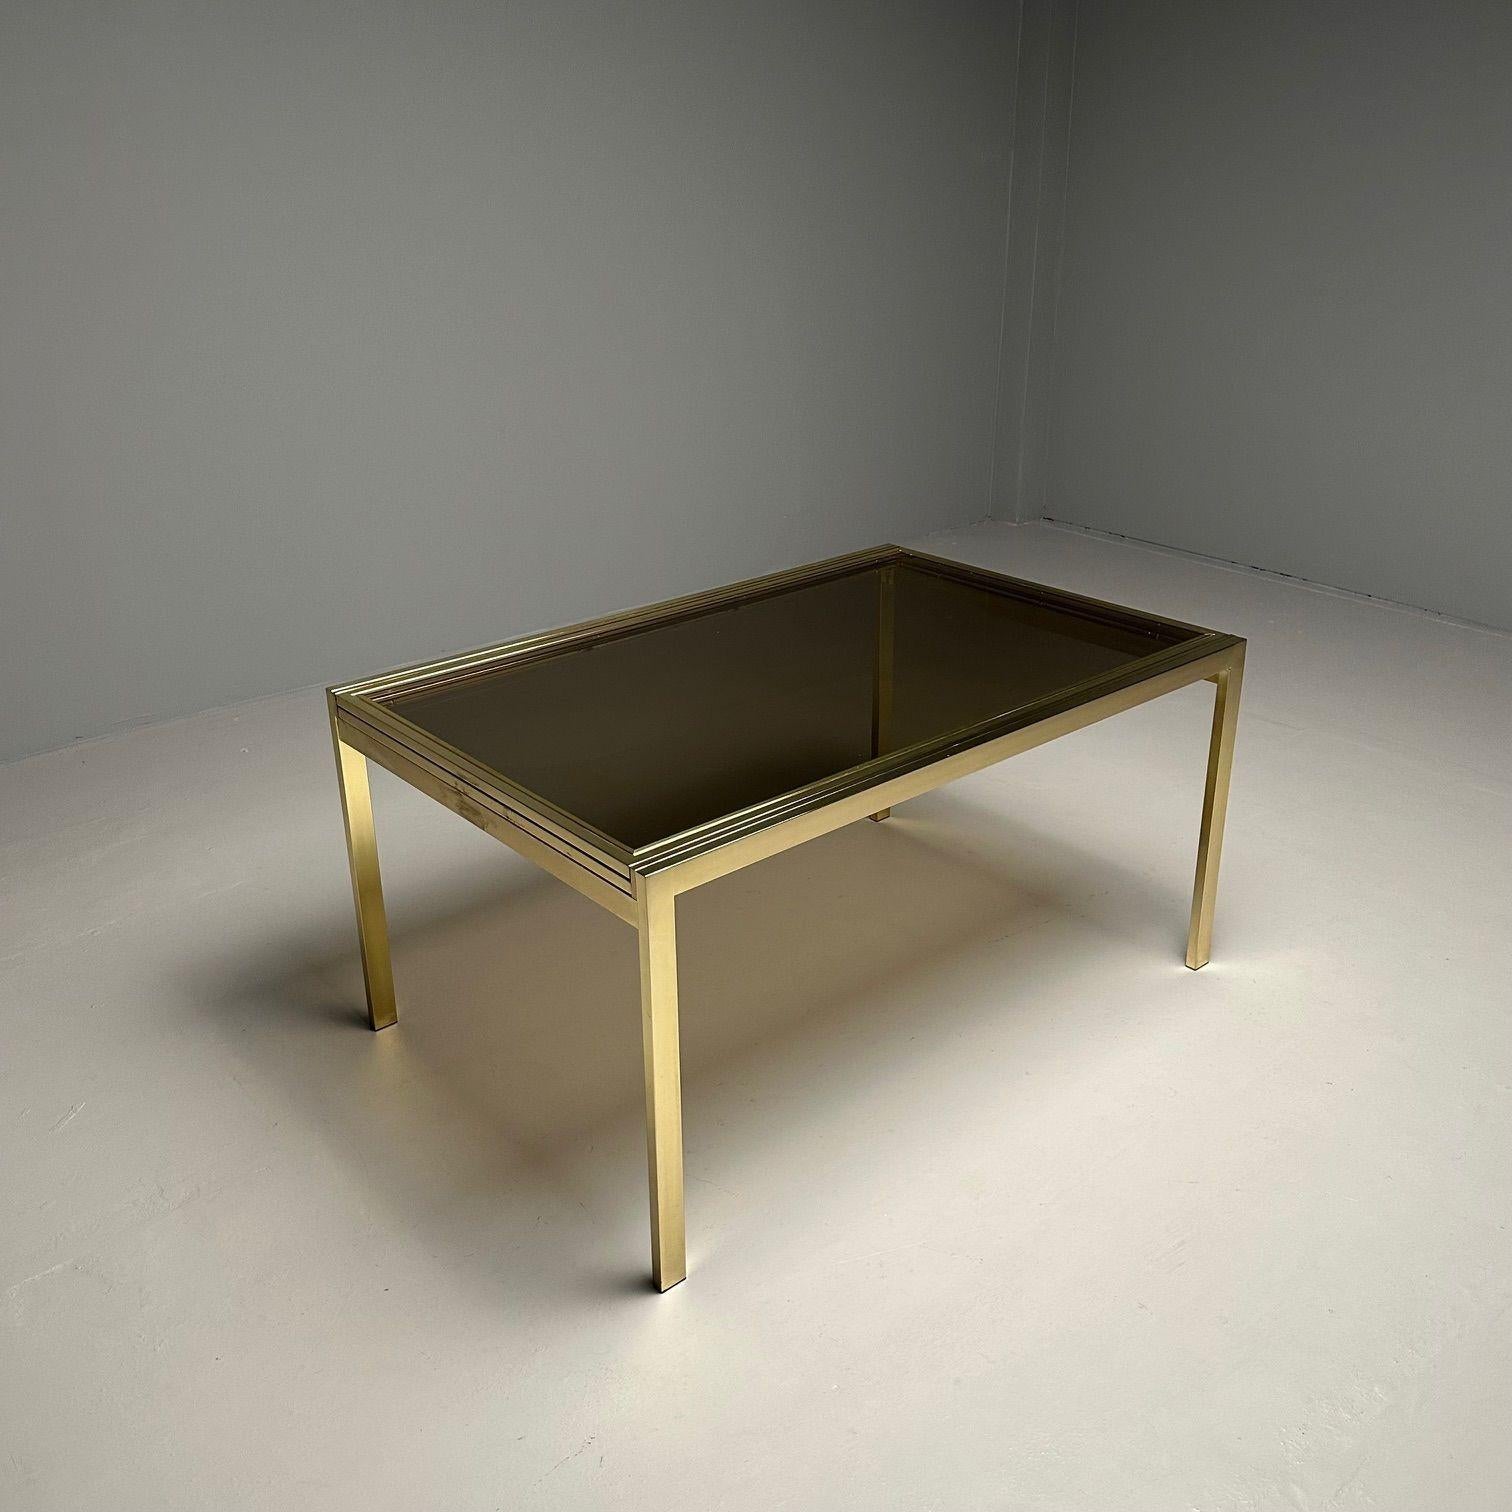 Milo Baughman, DIA, Mid-Century Modern Dining Table, Smoked Glass, Brass, Canada For Sale 10